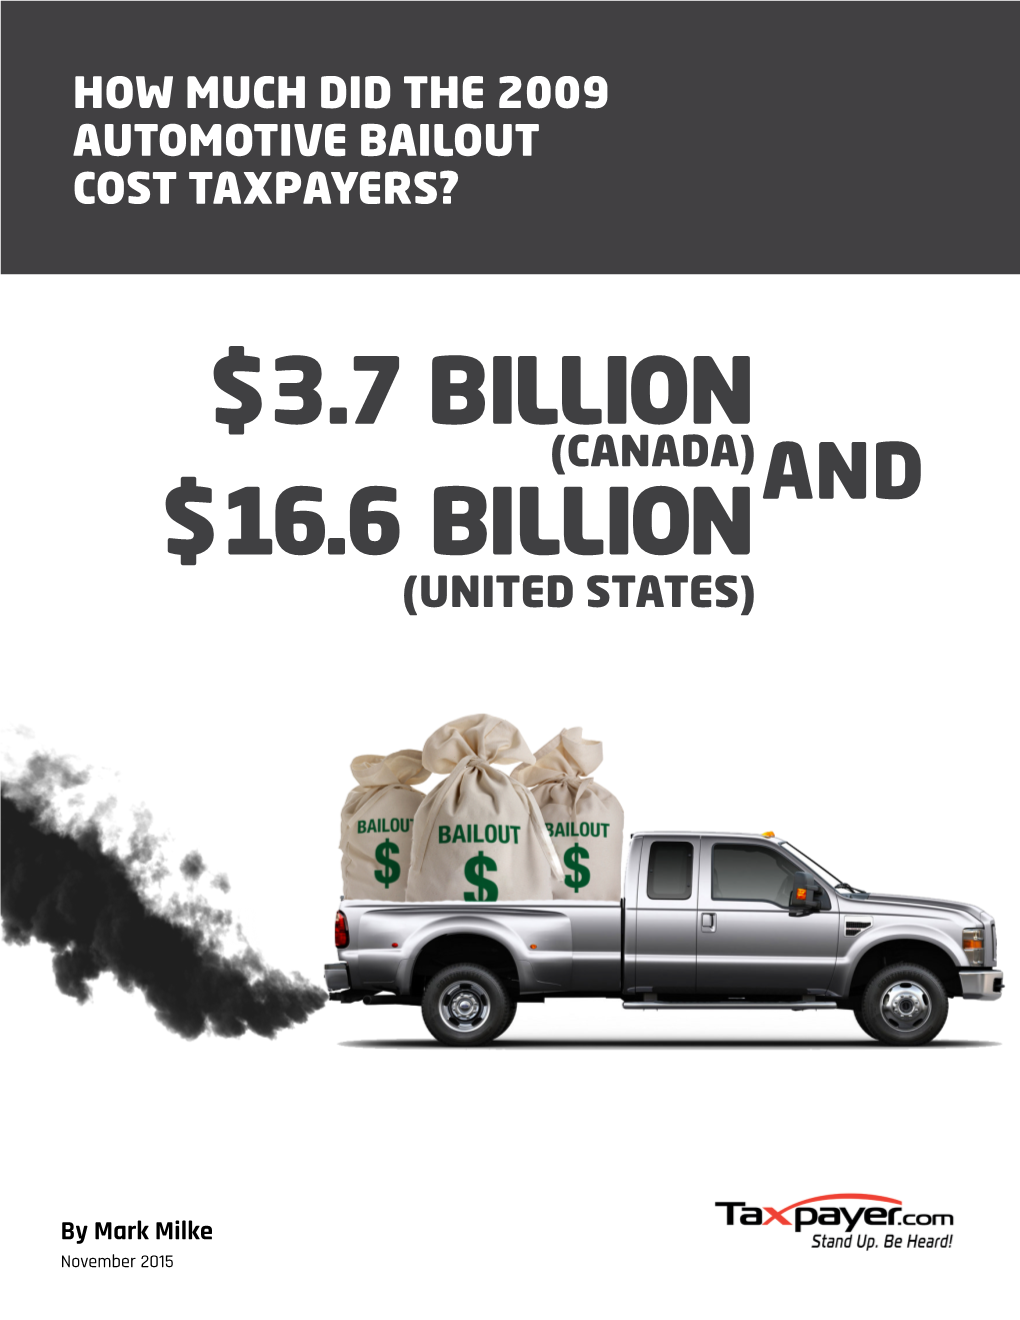 How Much Did the 2009 Automotive Bailout Cost Taxpayers?